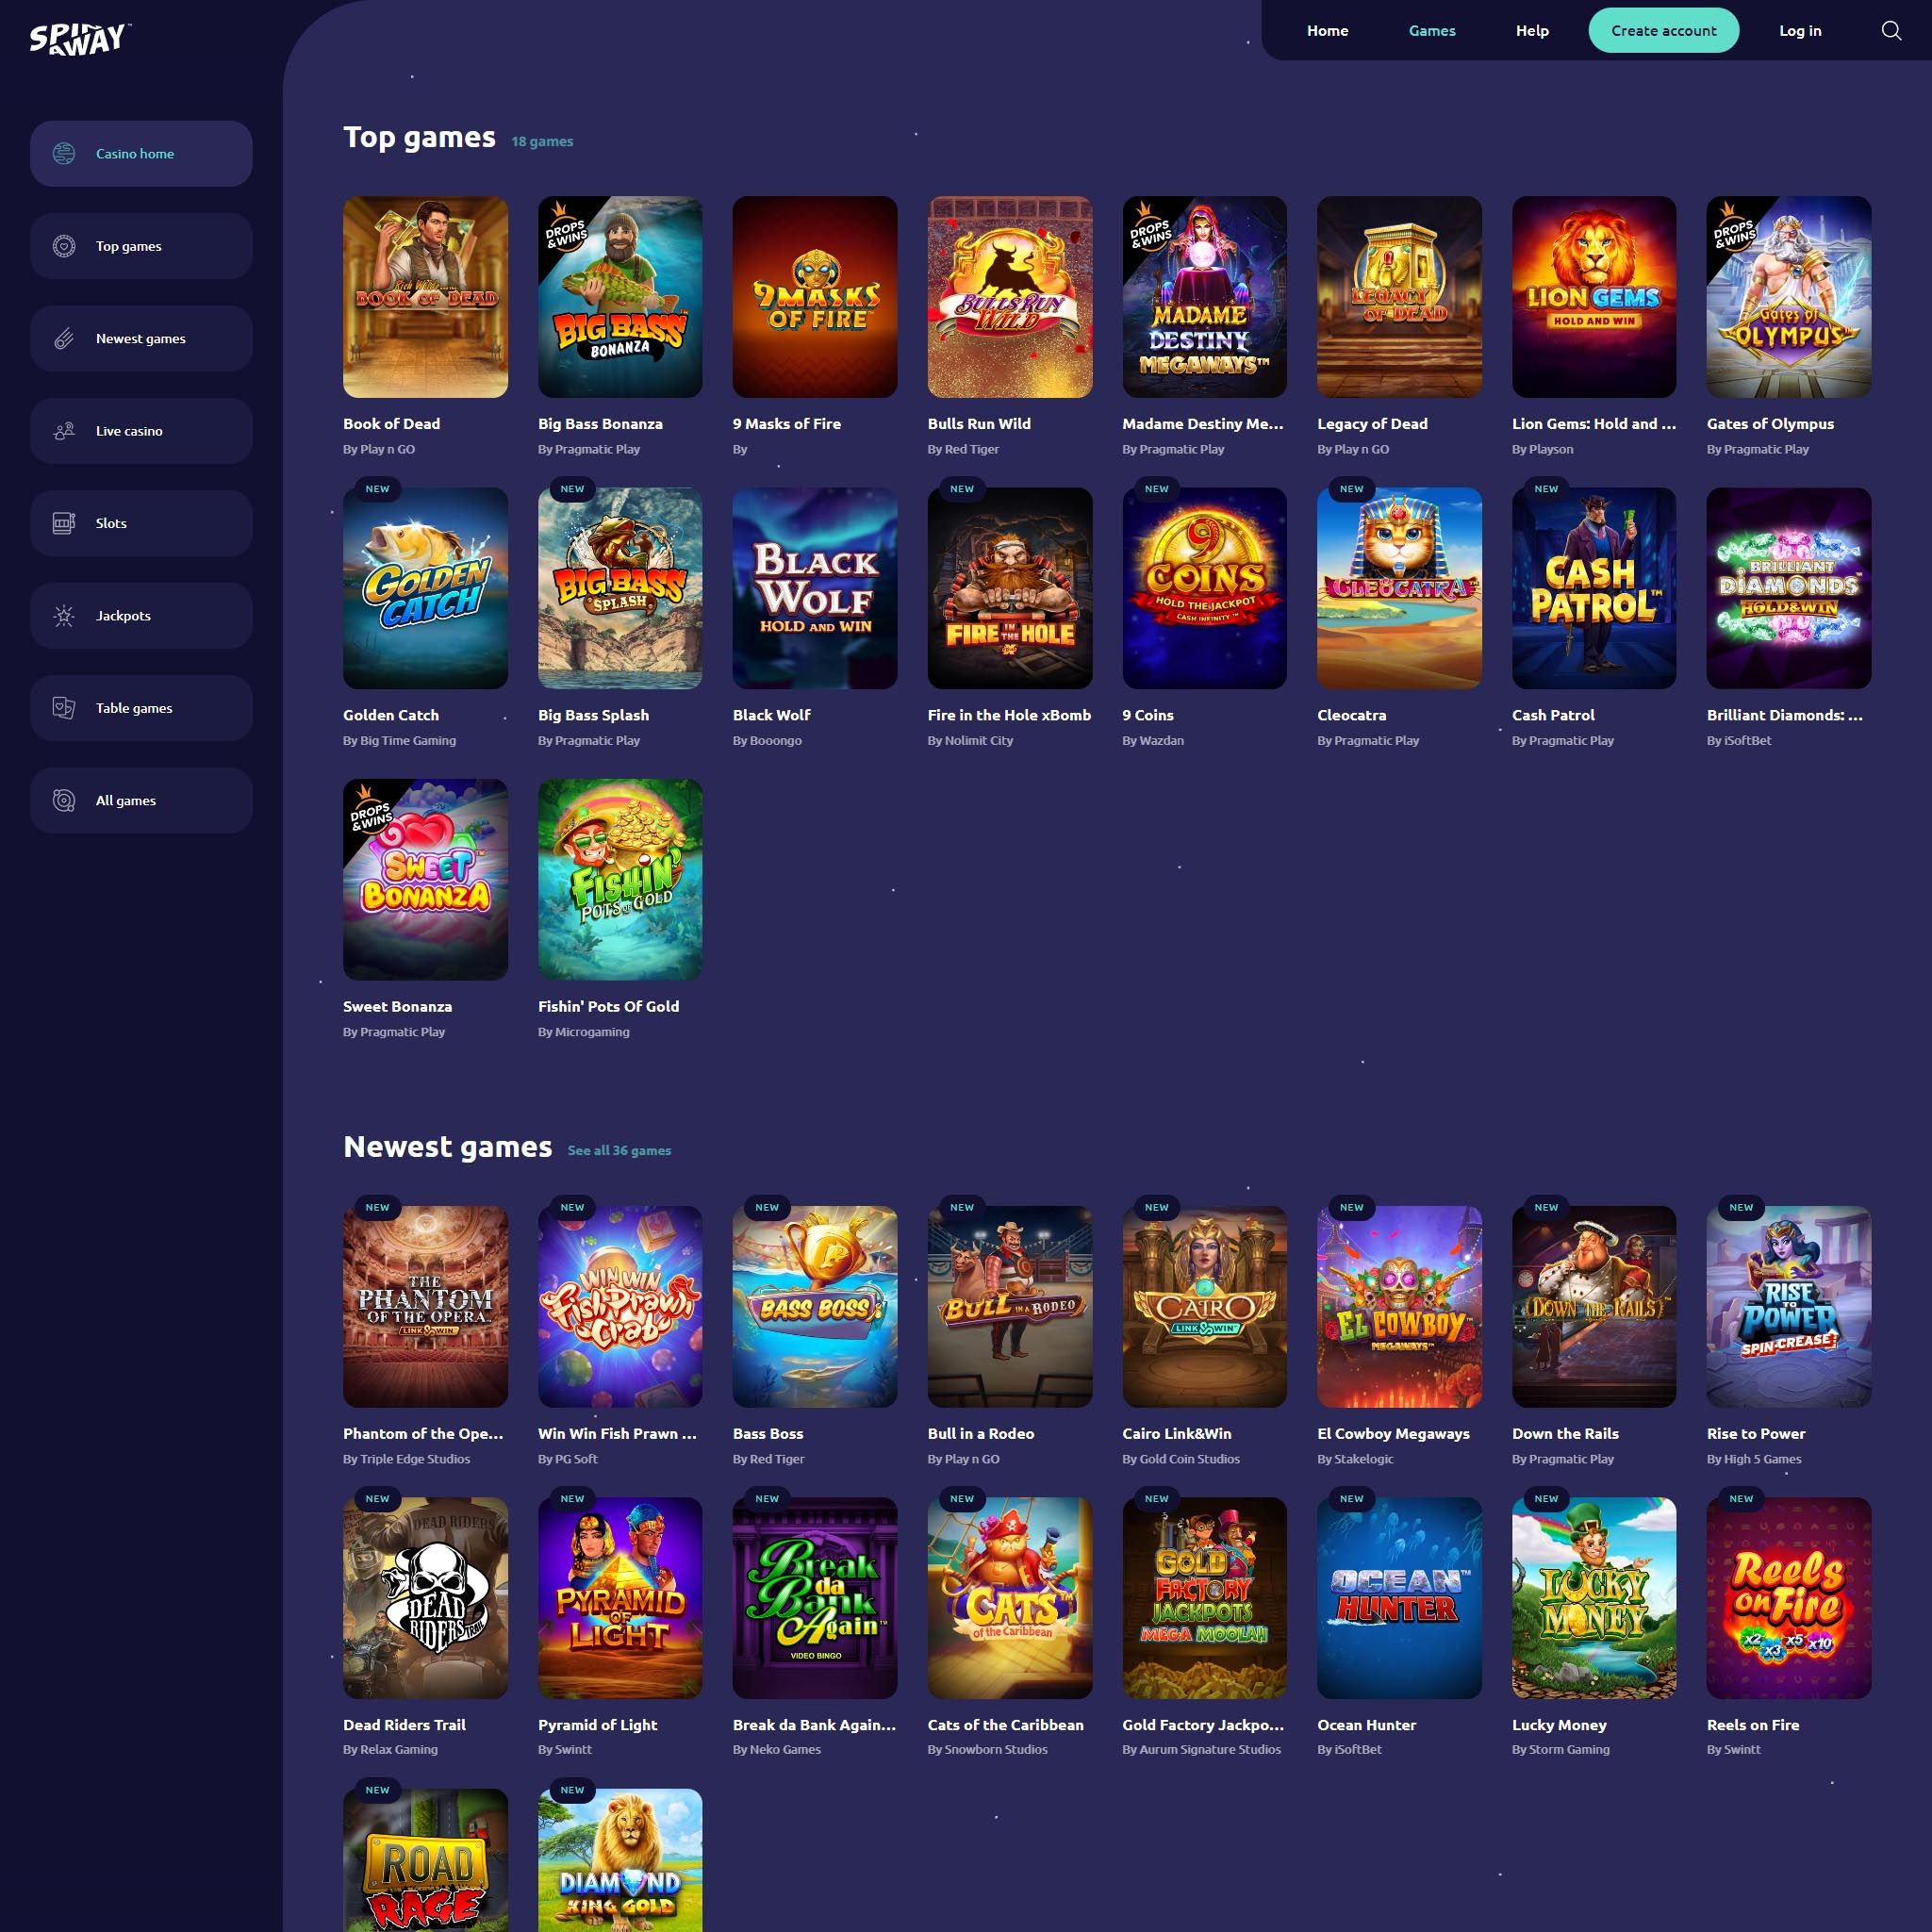 SpinAway Casino full games catalogue